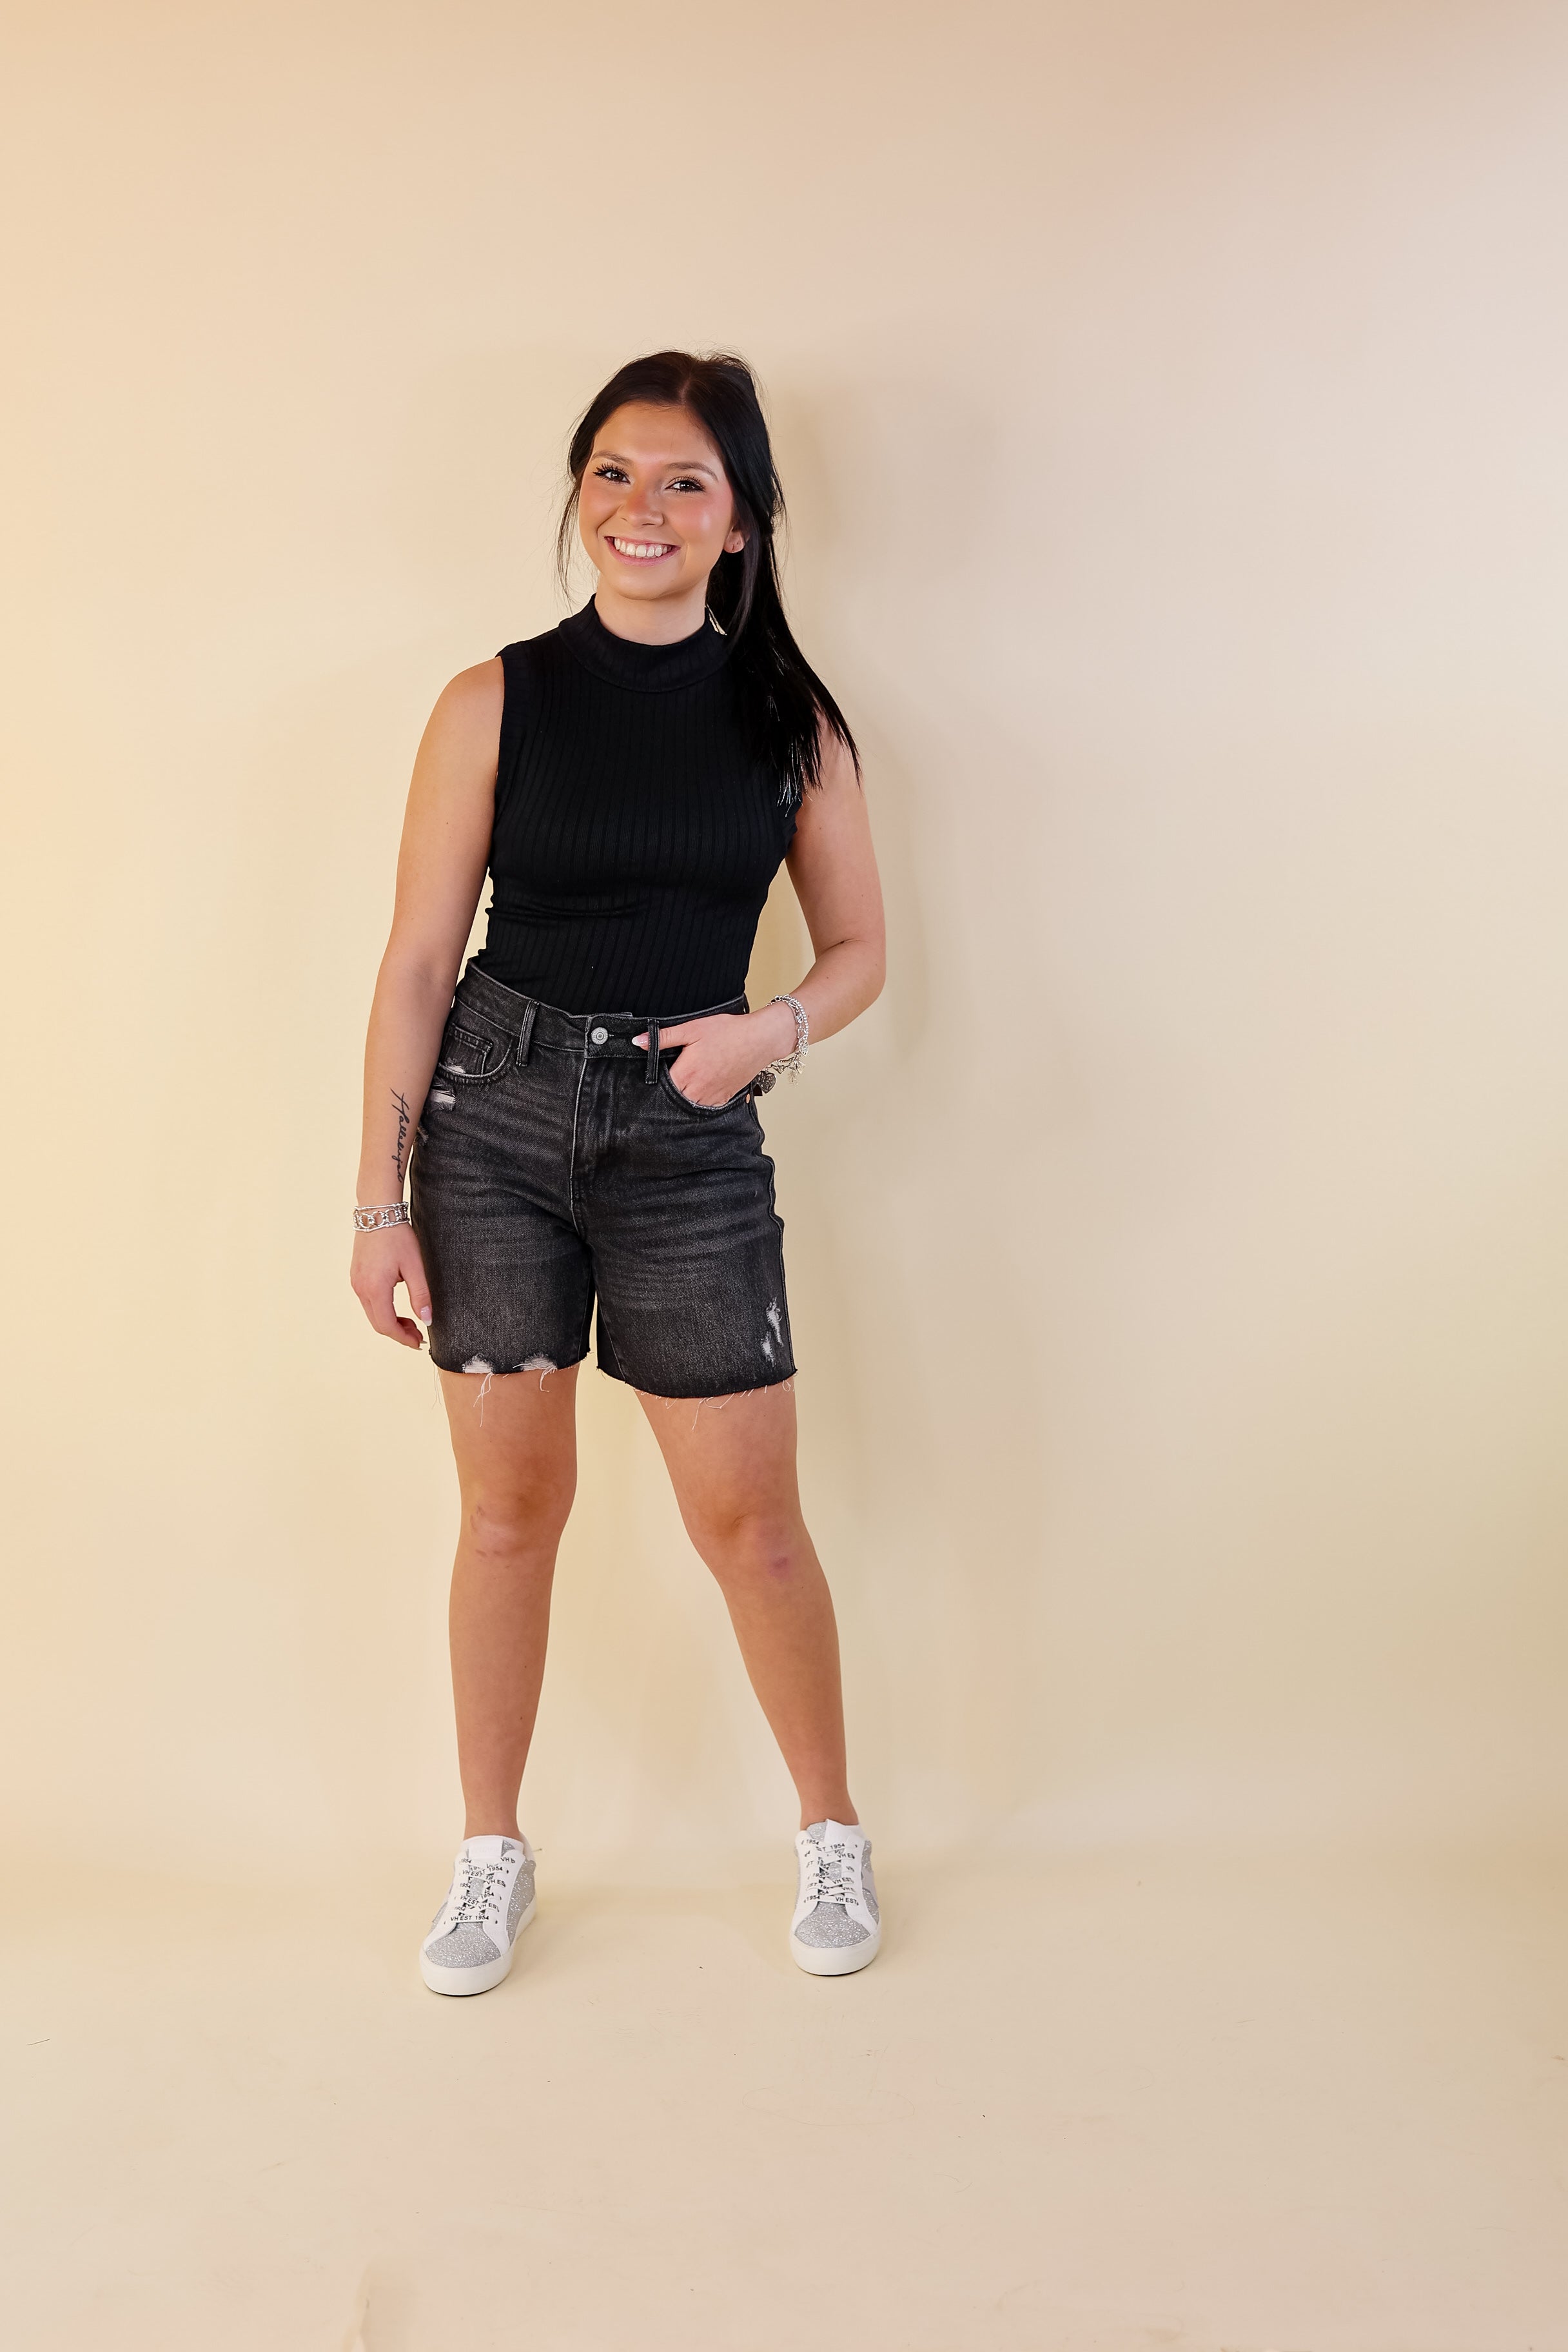 Judy Blue | Everyday Ease Rigid Magic Mid Thigh Raw Hem Shorts in Black Wash - Giddy Up Glamour Boutique